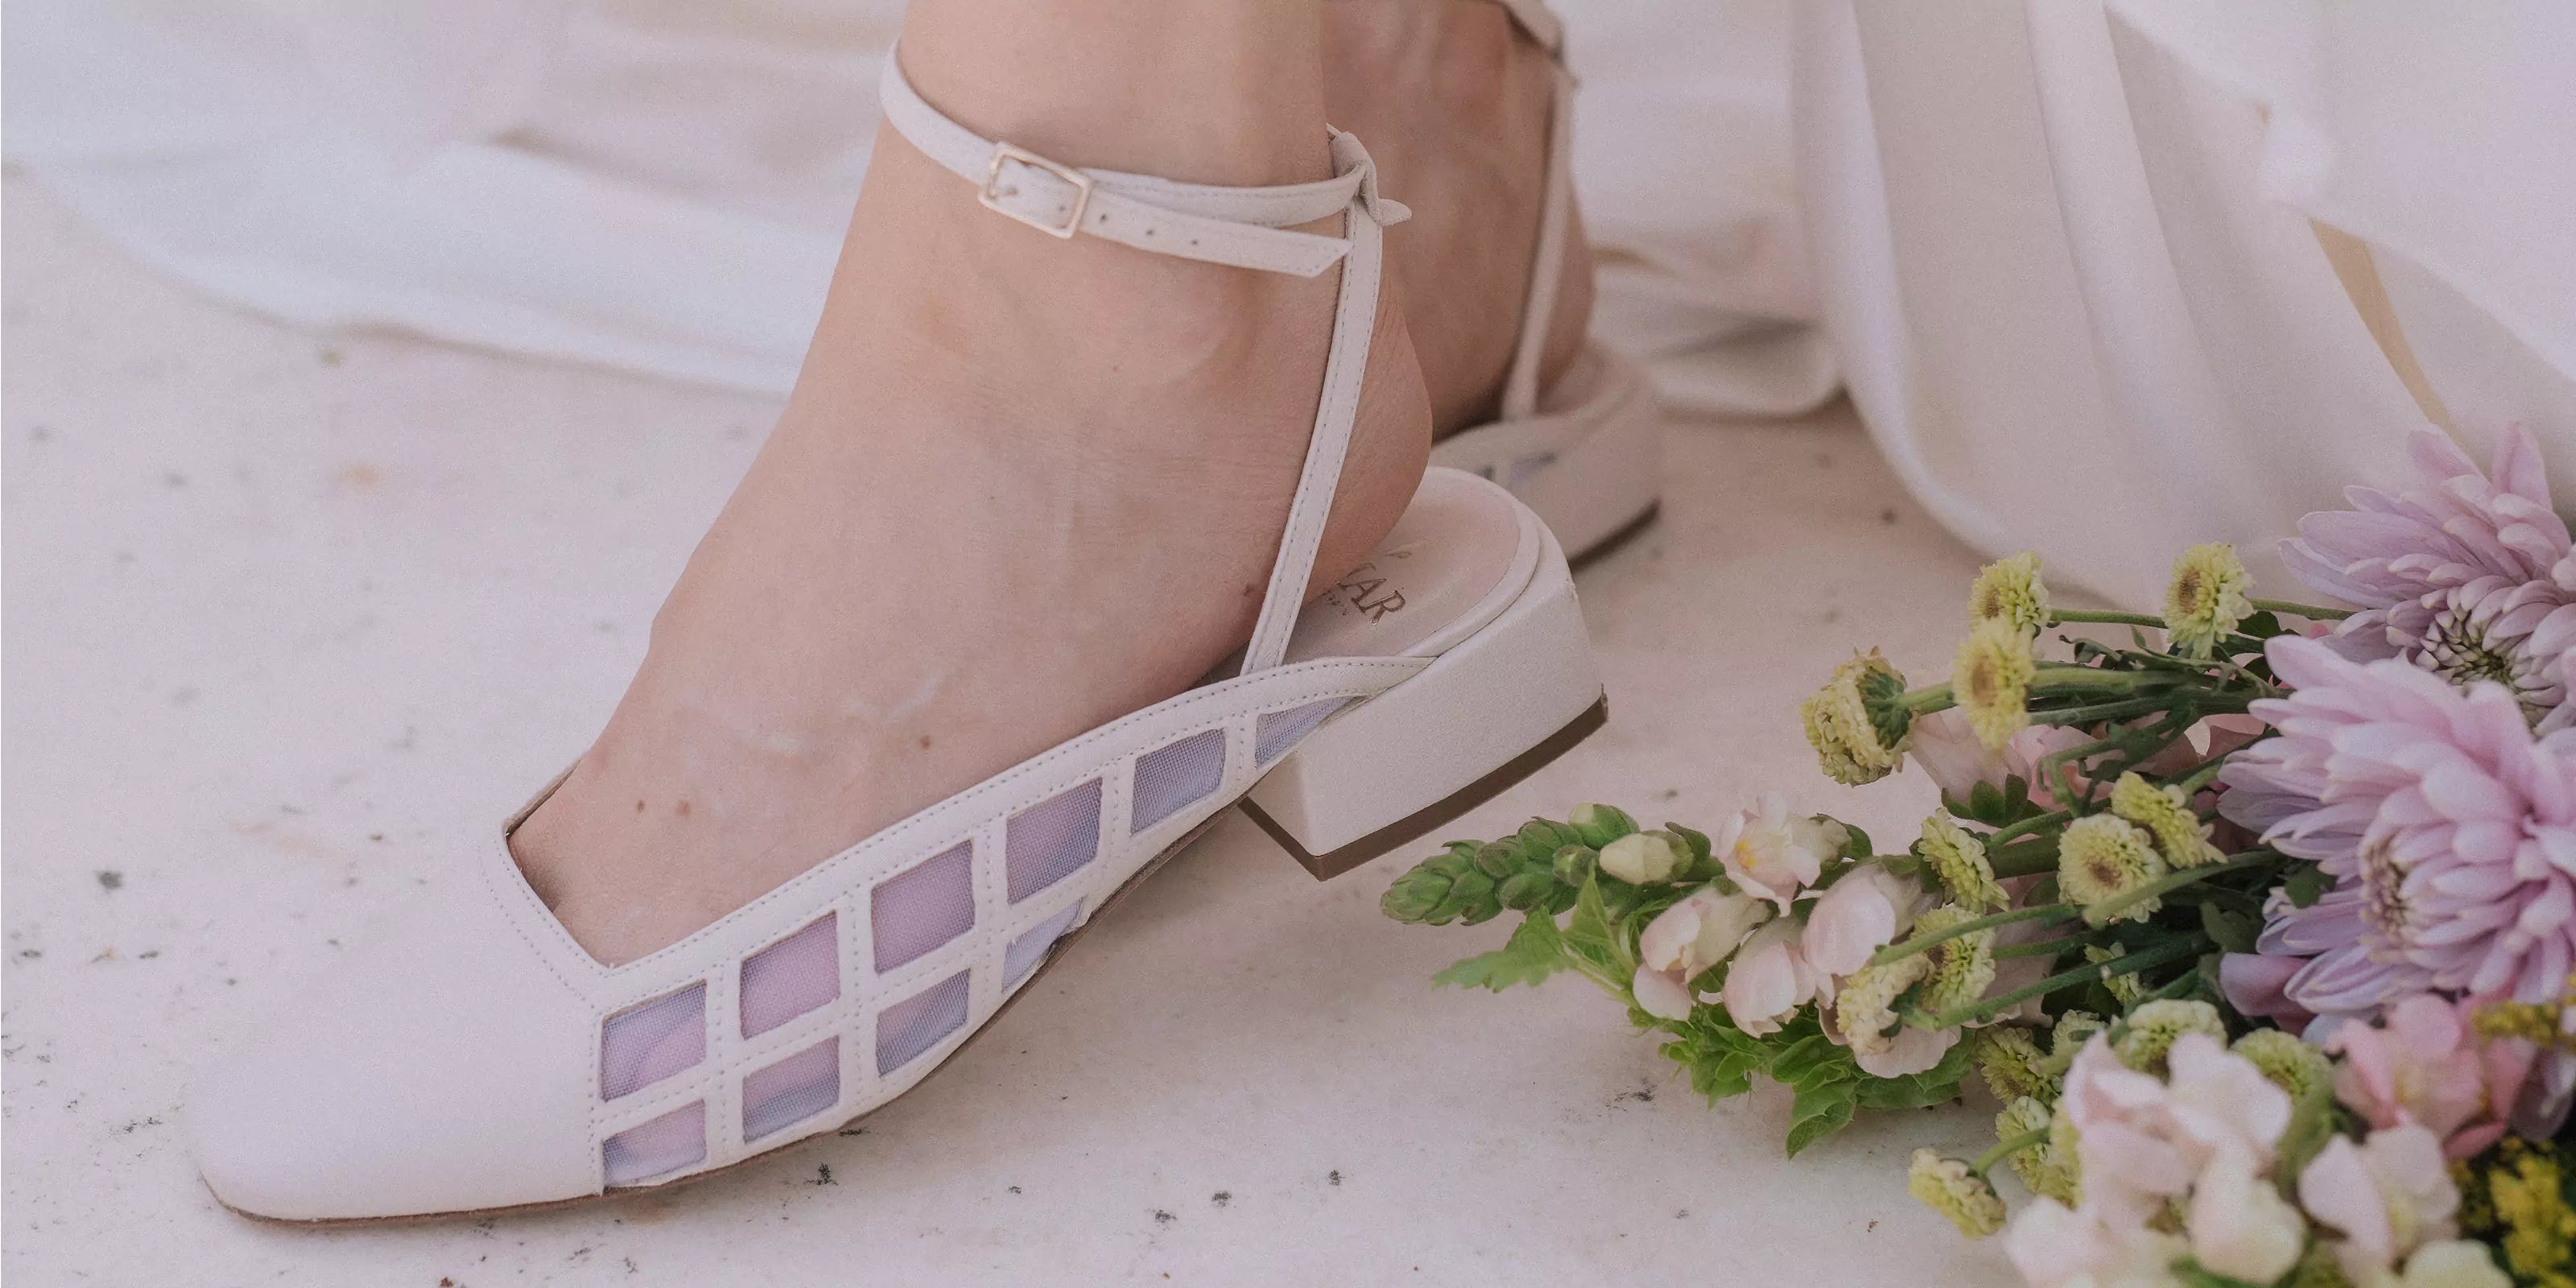 The Best Wedding Heels - E'mar Made in Italy